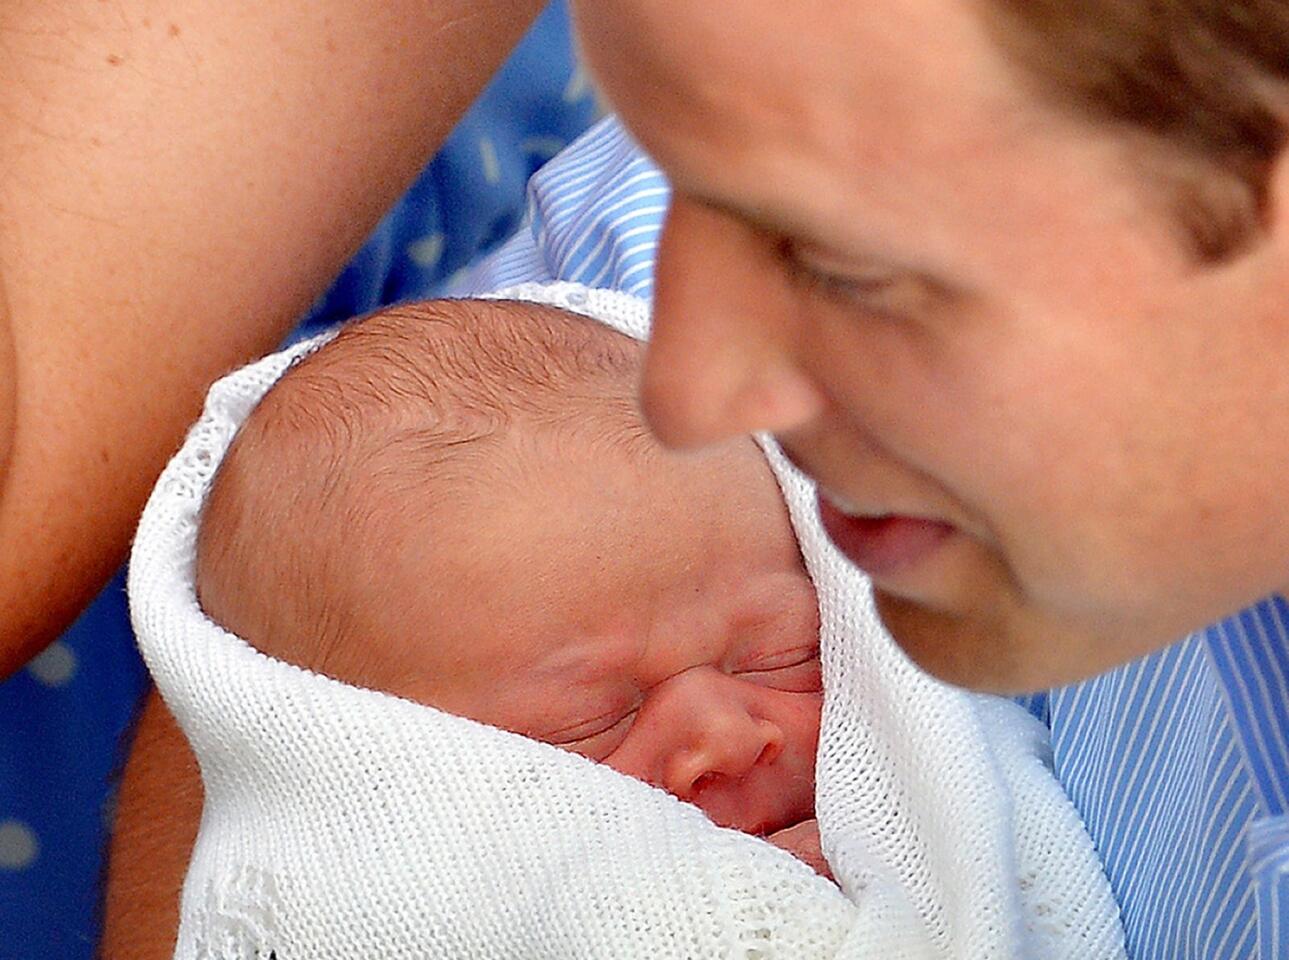 The newborn Prince of Cambridge leaves St Mary's Hospital with his parents the Prince William, Duke of Cambridge and Catherine, Duchess of Cambridge.